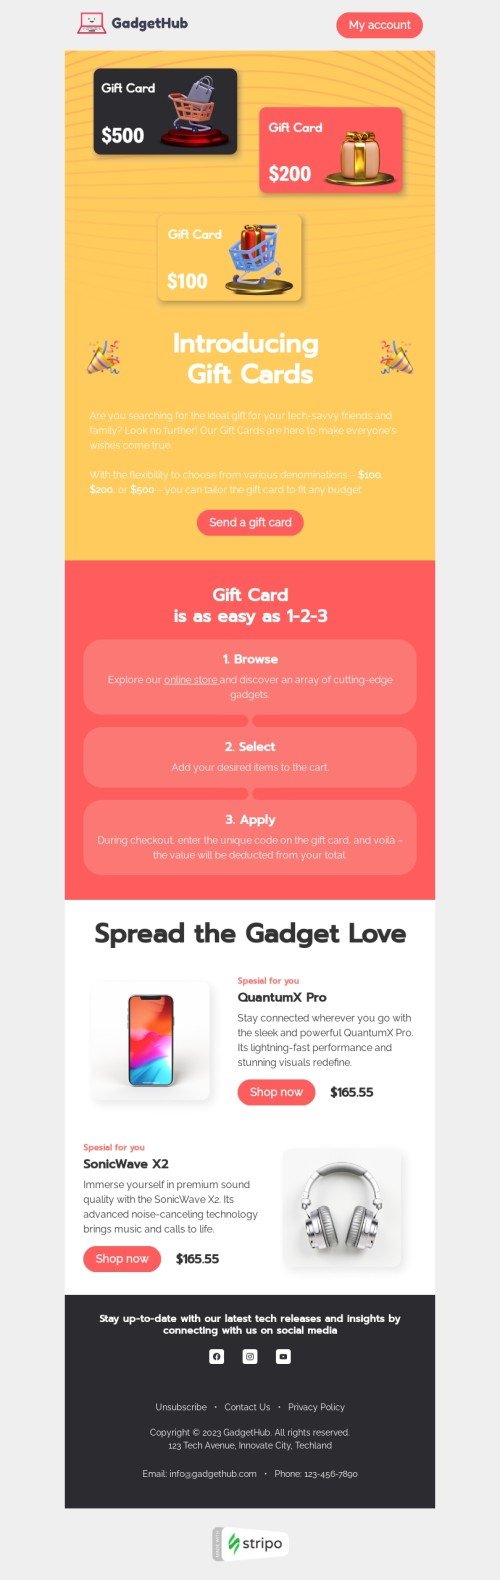 Gift сard email template "Introducing gift cards" for gadgets industry desktop view